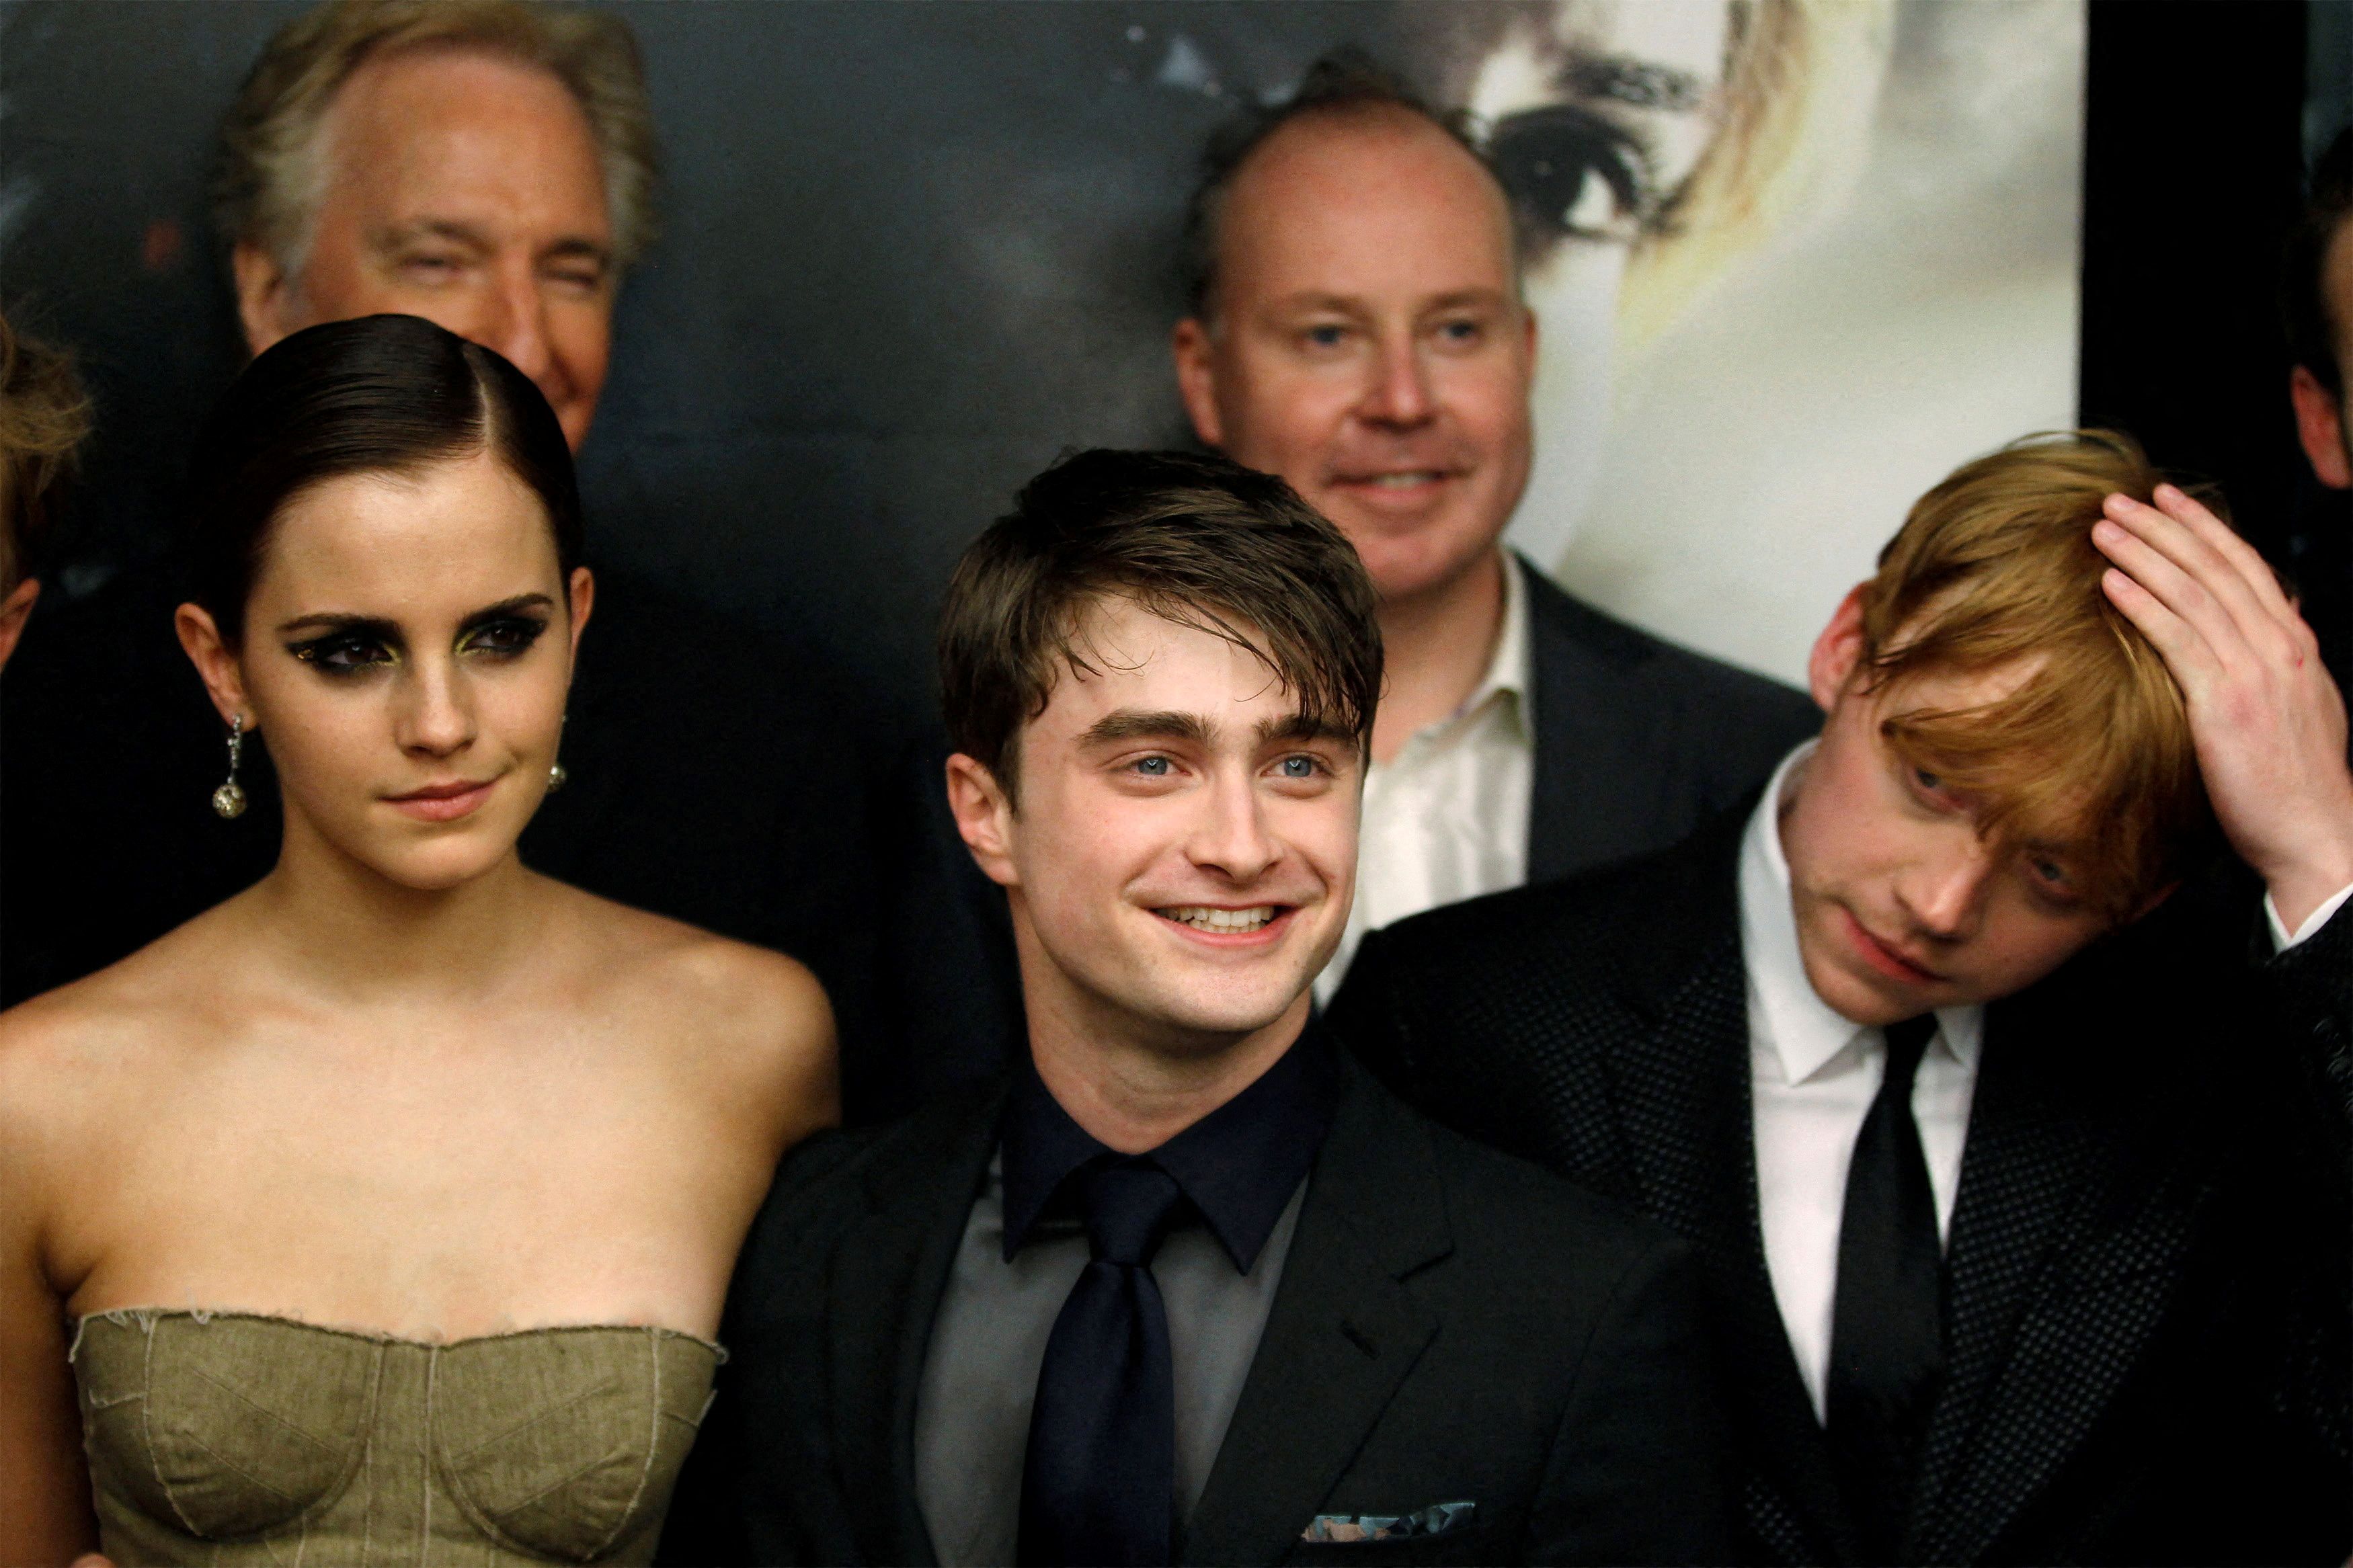 Cast members Rupert Grint (R), Daniel Radcliffe and Emma Watson (L) arrive for the premiere of the film 